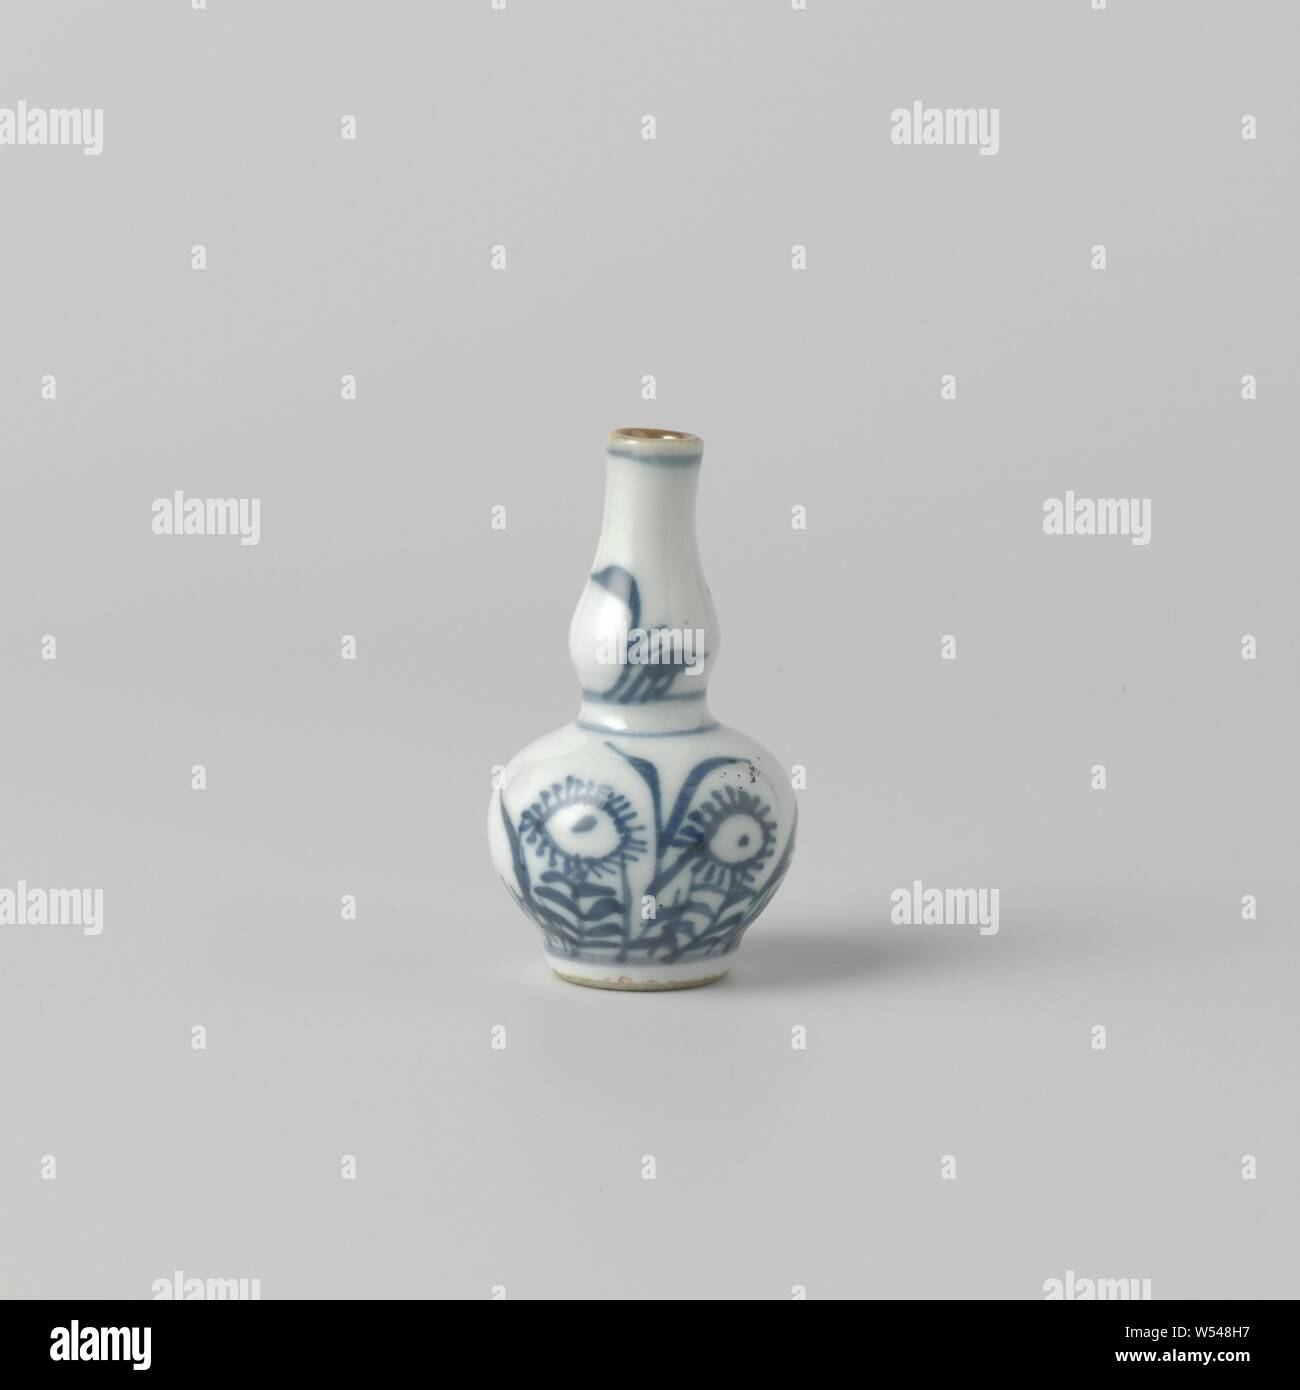 Miniature double-gourd-shaped vase with flower sprays, Miniature gourd-shaped porcelain vase, painted in underglaze blue. On the belly a flowering plant (aster) and twigs. Two flower branches on the neck. Blue White., anonymous, China, c. 1675 - c. 1724, Qing-dynasty (1644-1912) / Kangxi-period (1662-1722) / Yongzheng-period (1723-1735), porcelain (material), glaze, cobalt (mineral), vitrification, h 6.1 cm × d 3.5 cm Stock Photo